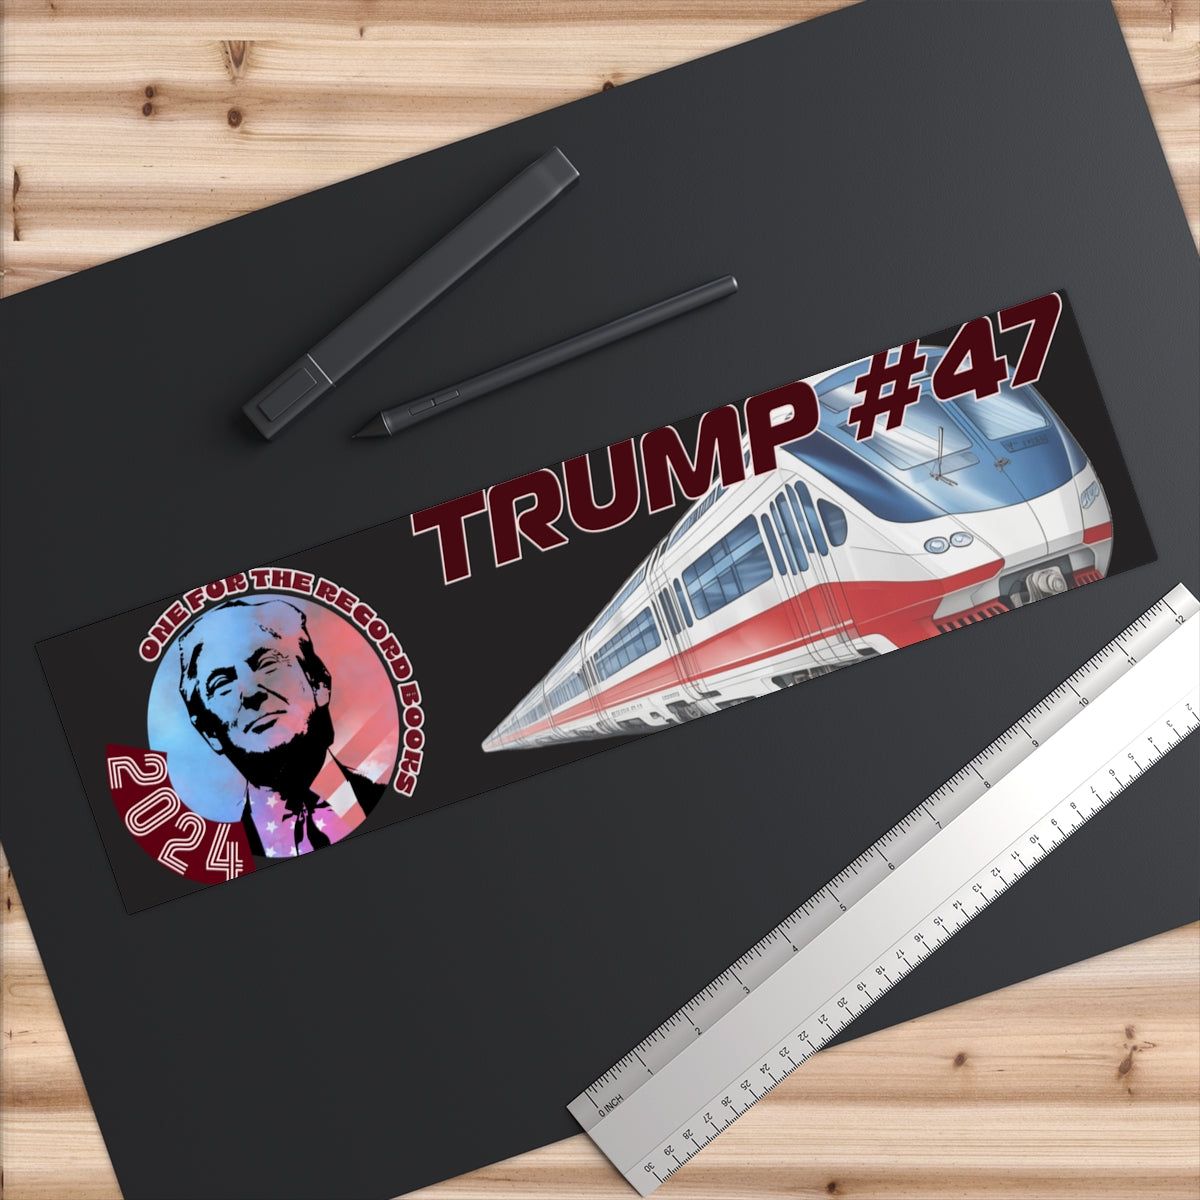 Trump 2024 Bumper Stickers - Show Your Support Now - Iron Phoenix GHG